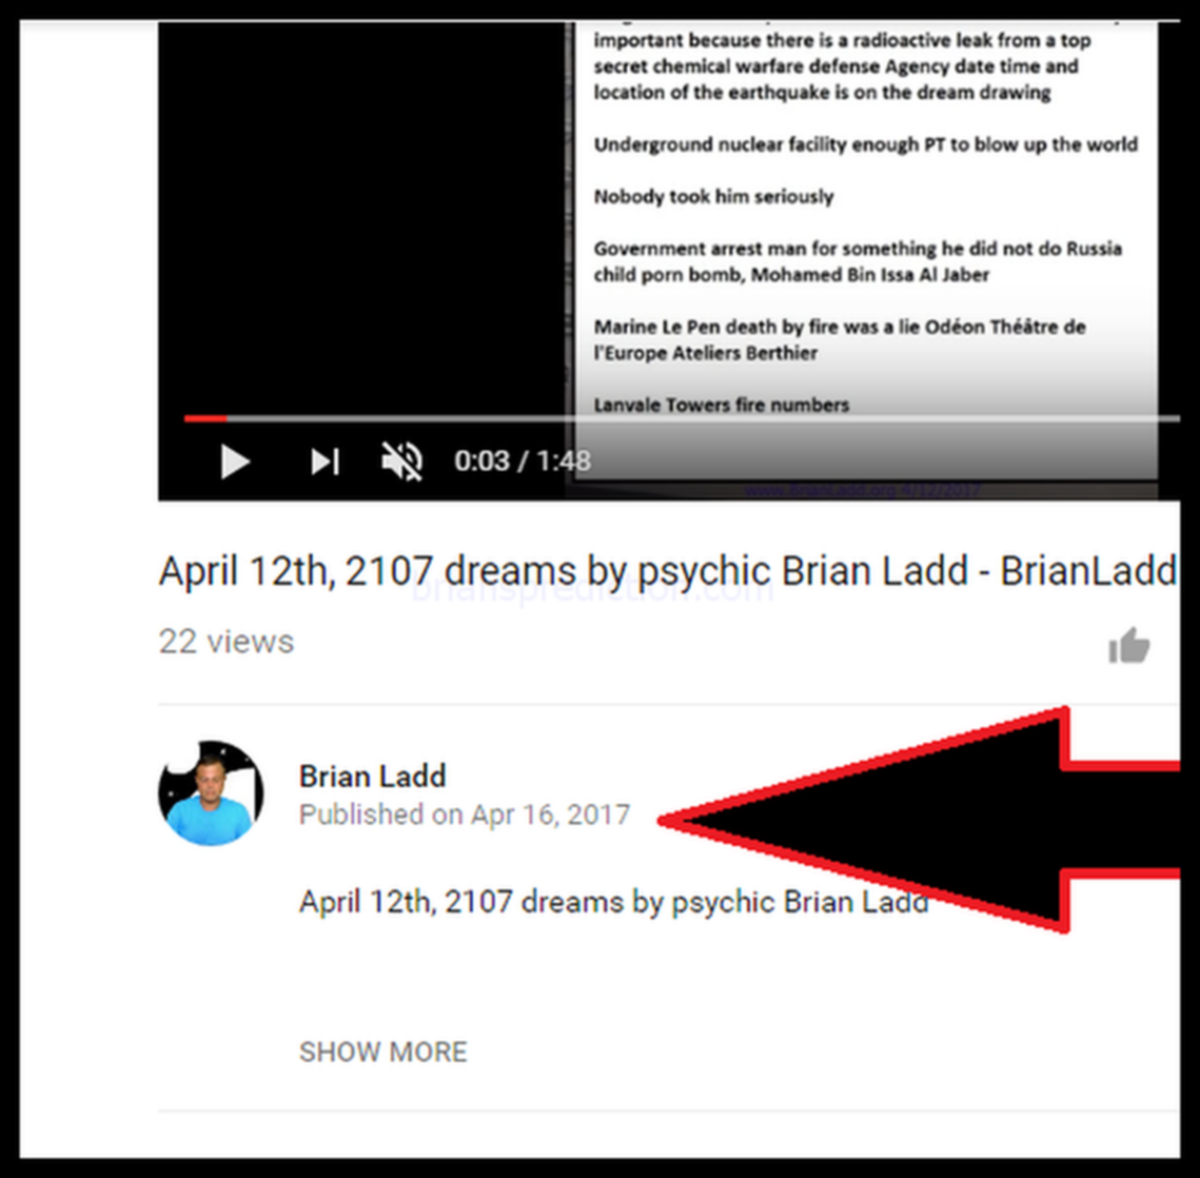 Youtube April 12Th 2017 Dreams Posted On Youtube On April 16Th 2017 - Upcoming School Shooter Dream From March 2018, Sho...
Upcoming School Shooter Dream From March 2018, Shooter, Do Not Know What School or Date Yet.
